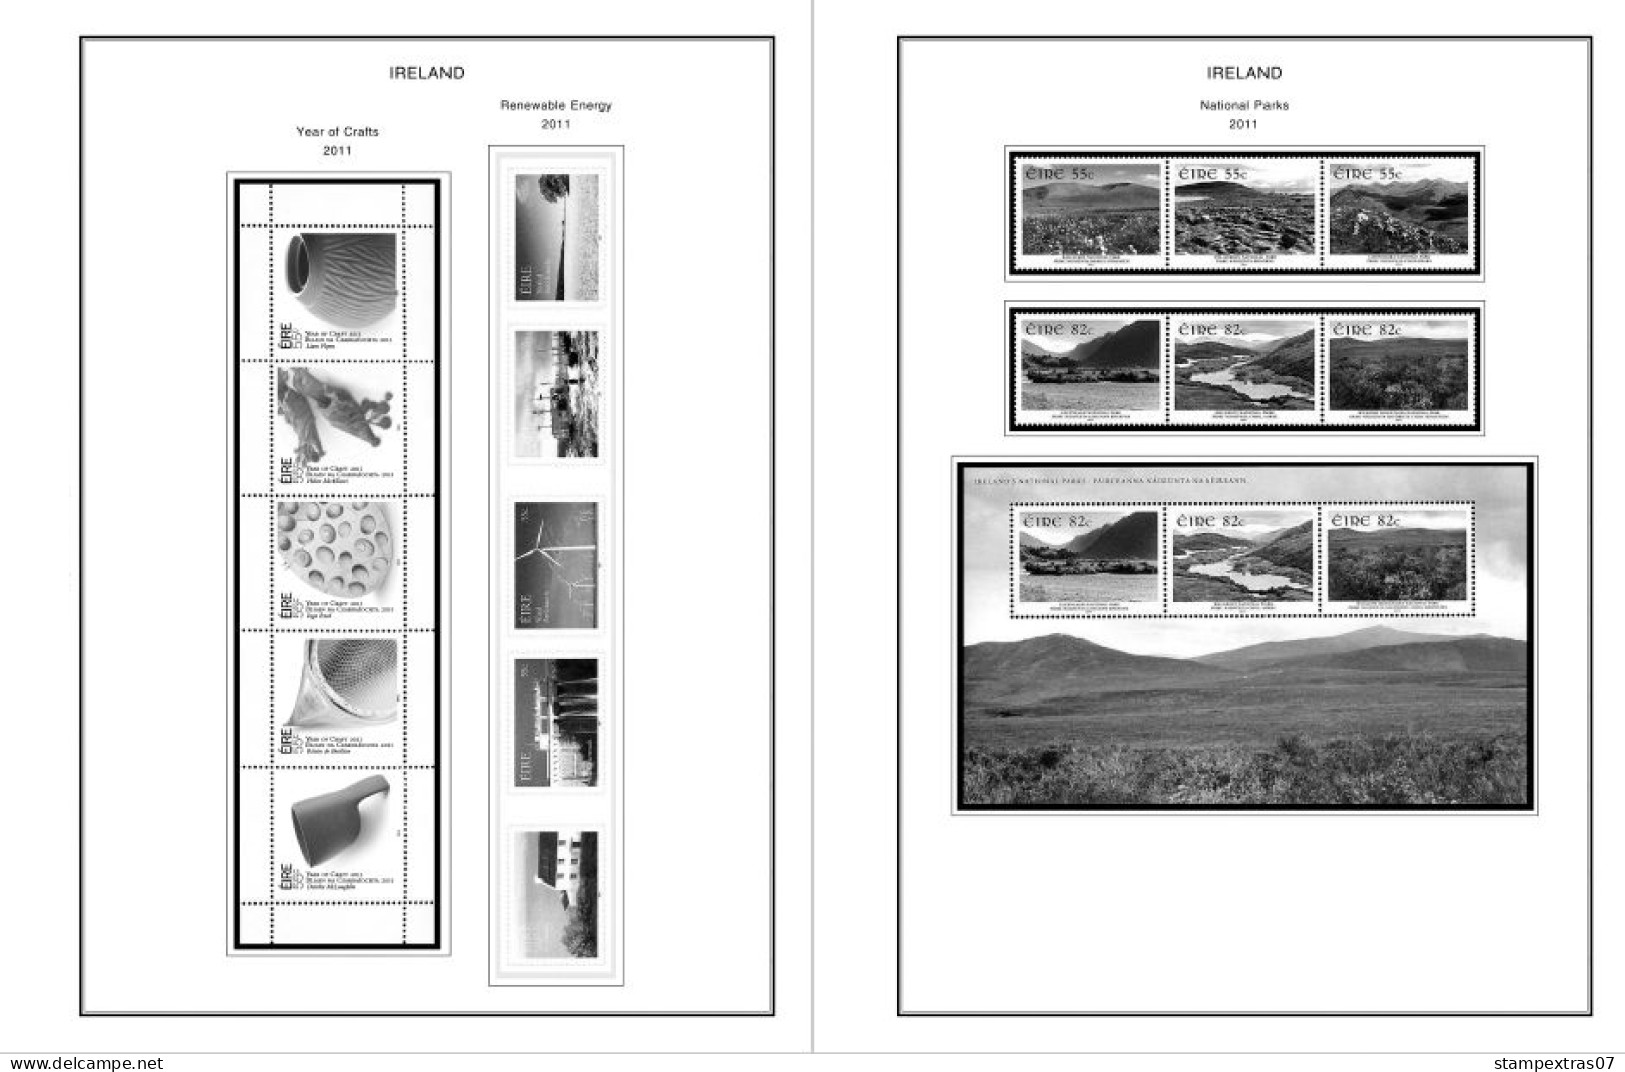 IRELAND 1922-2010 + 2011-2020 STAMP ALBUM PAGES (336 b&w illustrated pages)